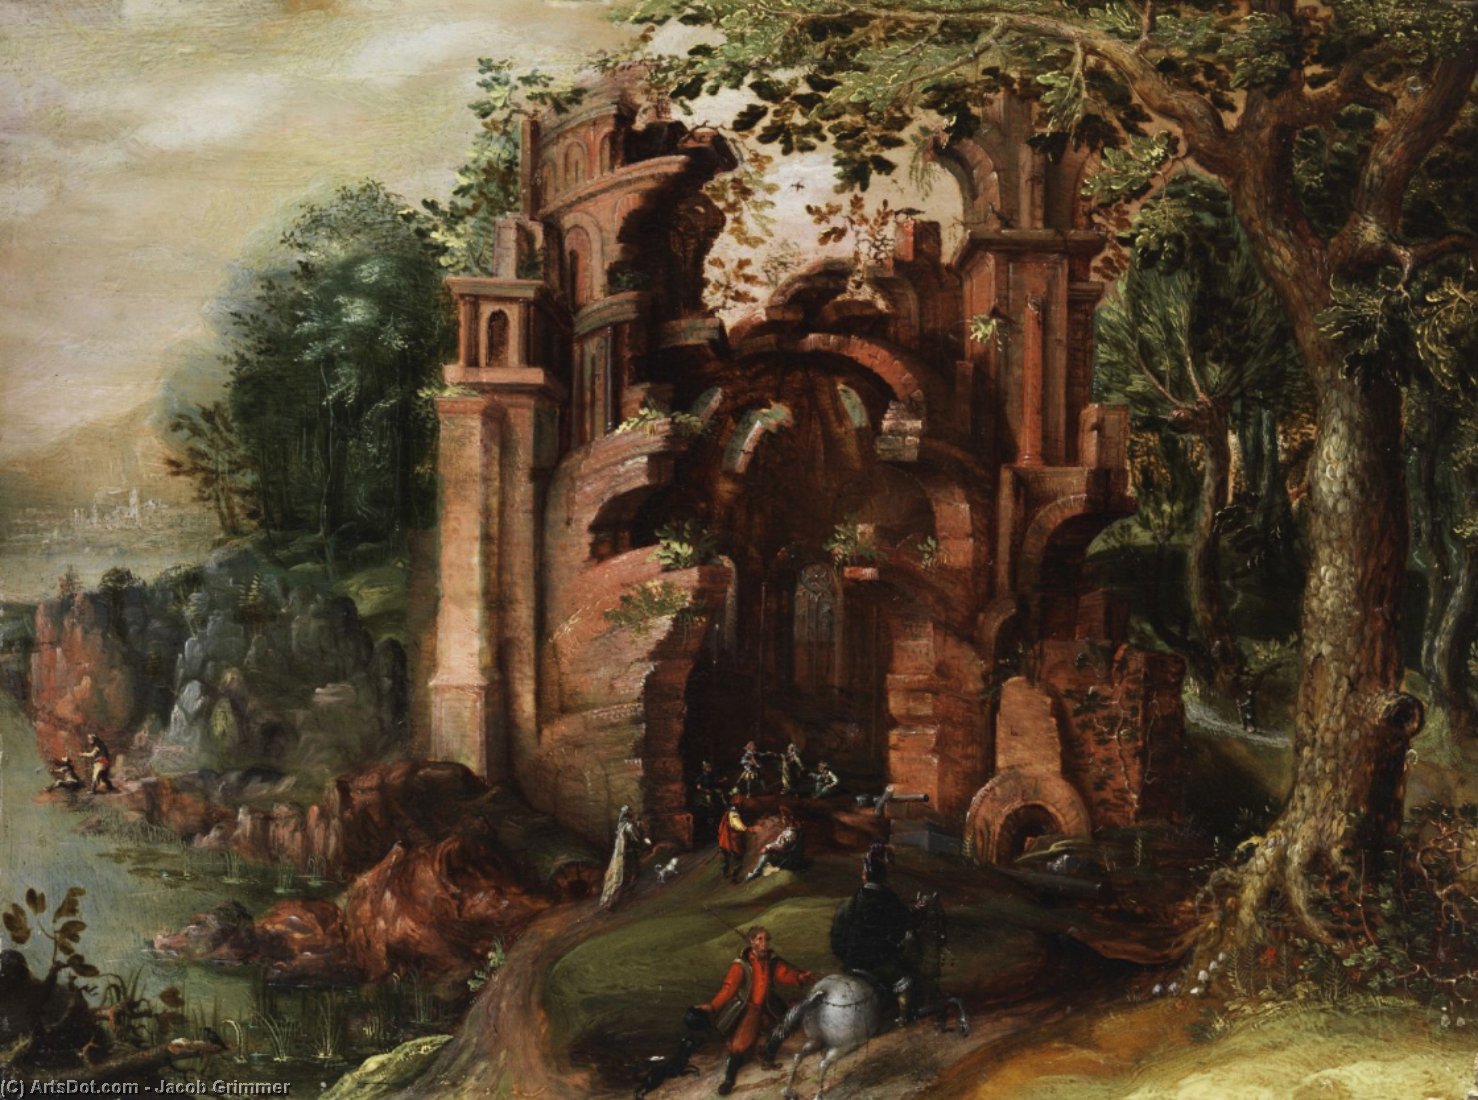 WikiOO.org - Encyclopedia of Fine Arts - Lukisan, Artwork Jacob Grimmer - Ruin in a forest